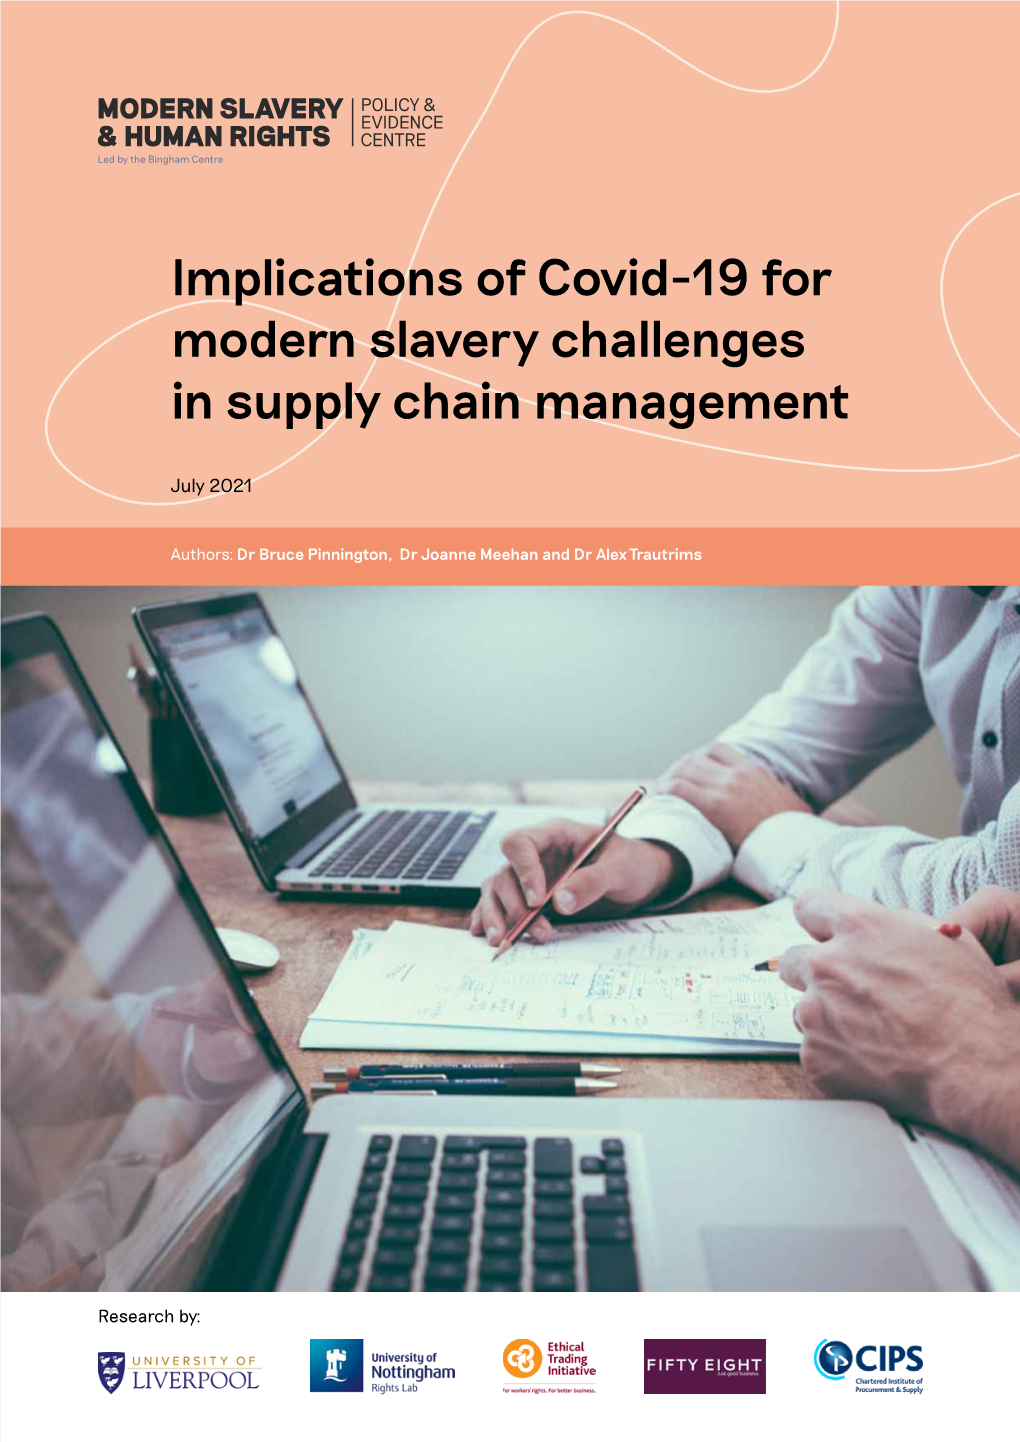 Implications of Covid-19 for Modern Slavery Challenges in Supply Chain Management